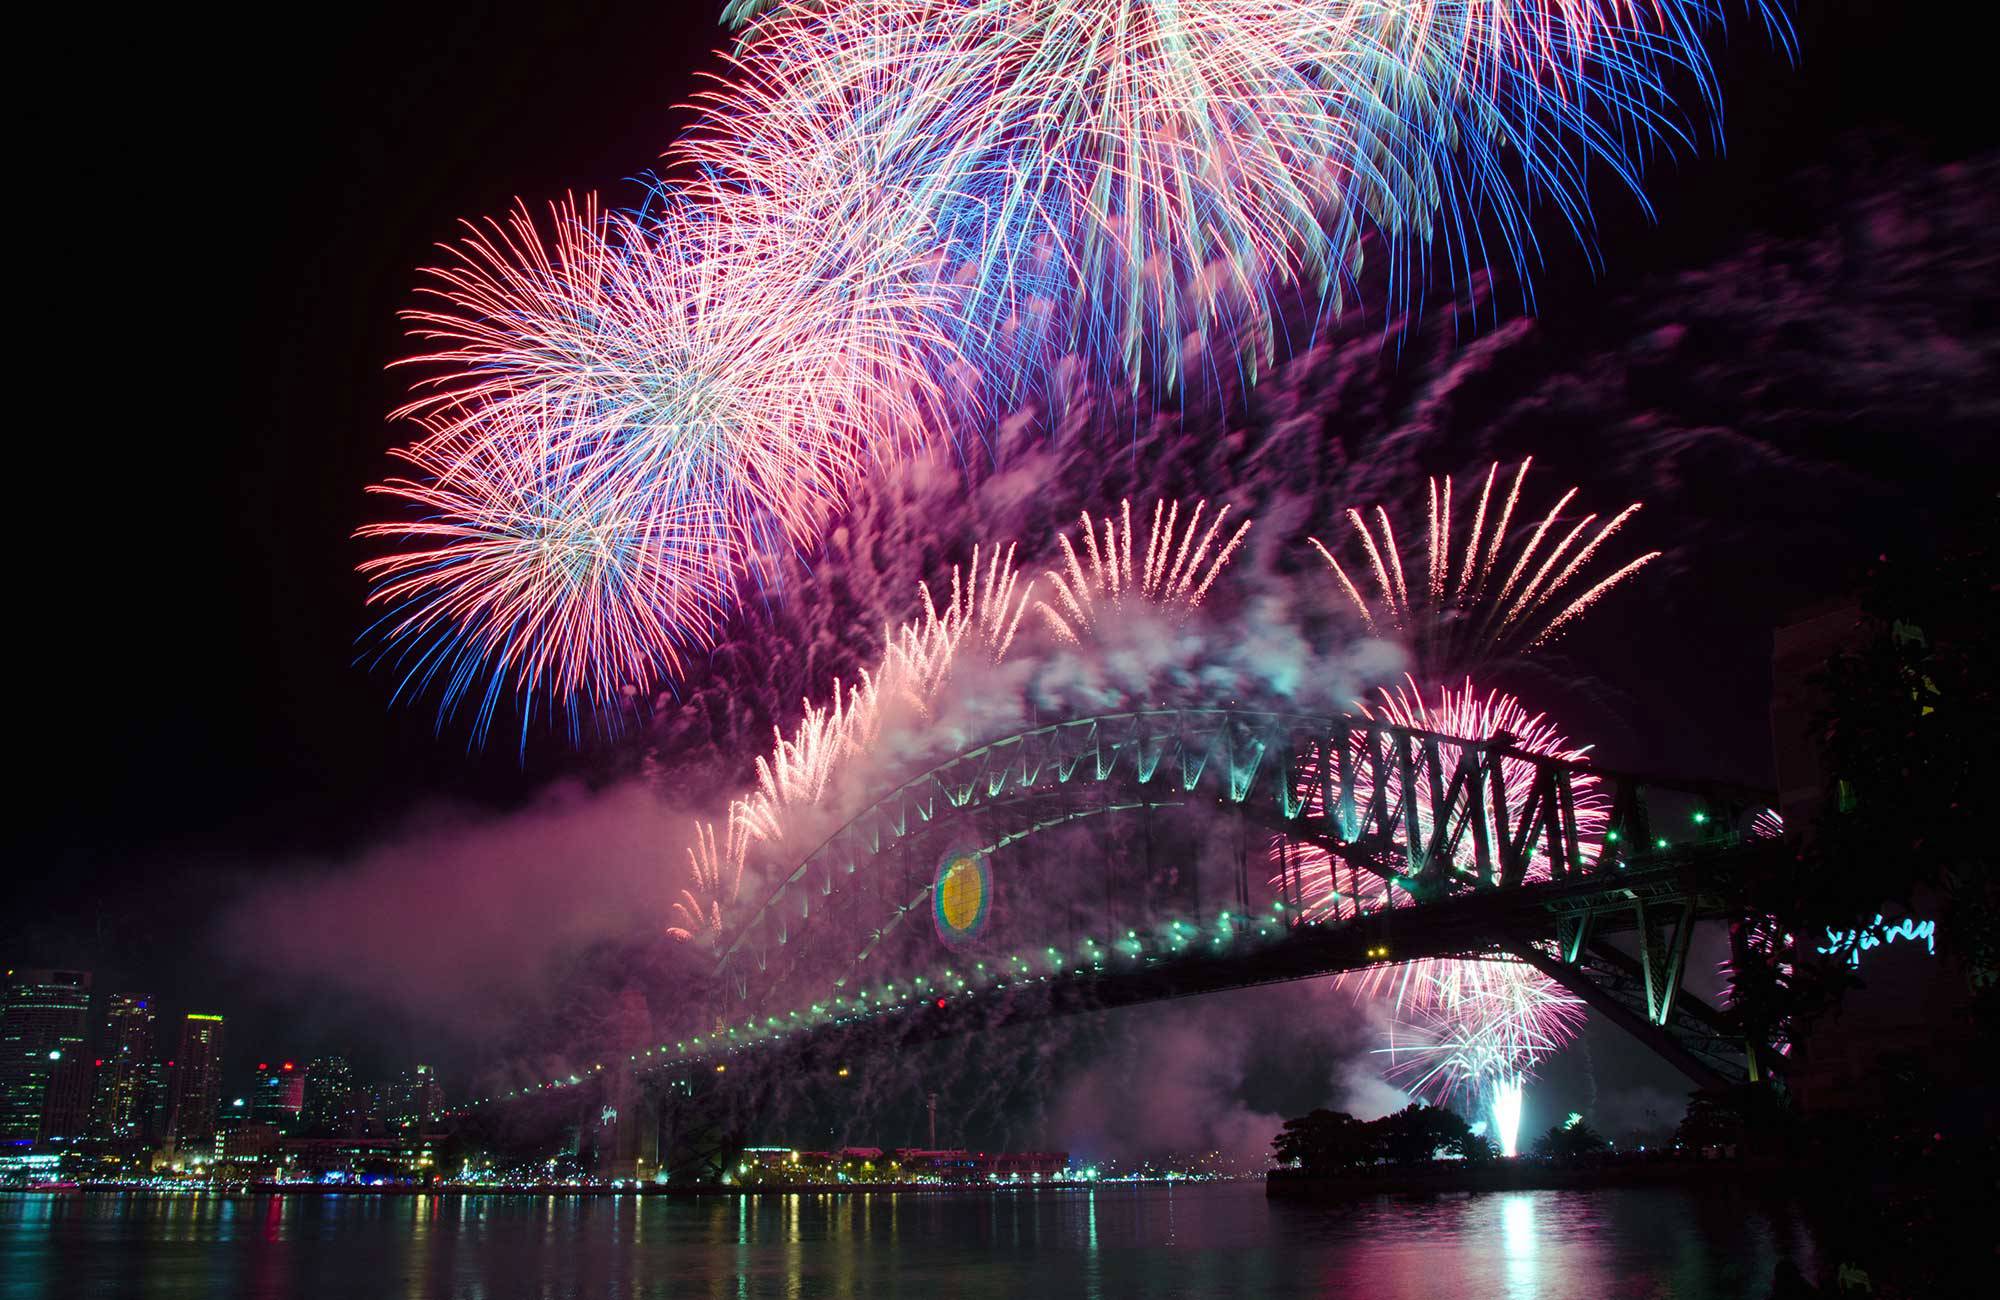 the fireworks in sydney is mindblowing, see them while you study in sydney 